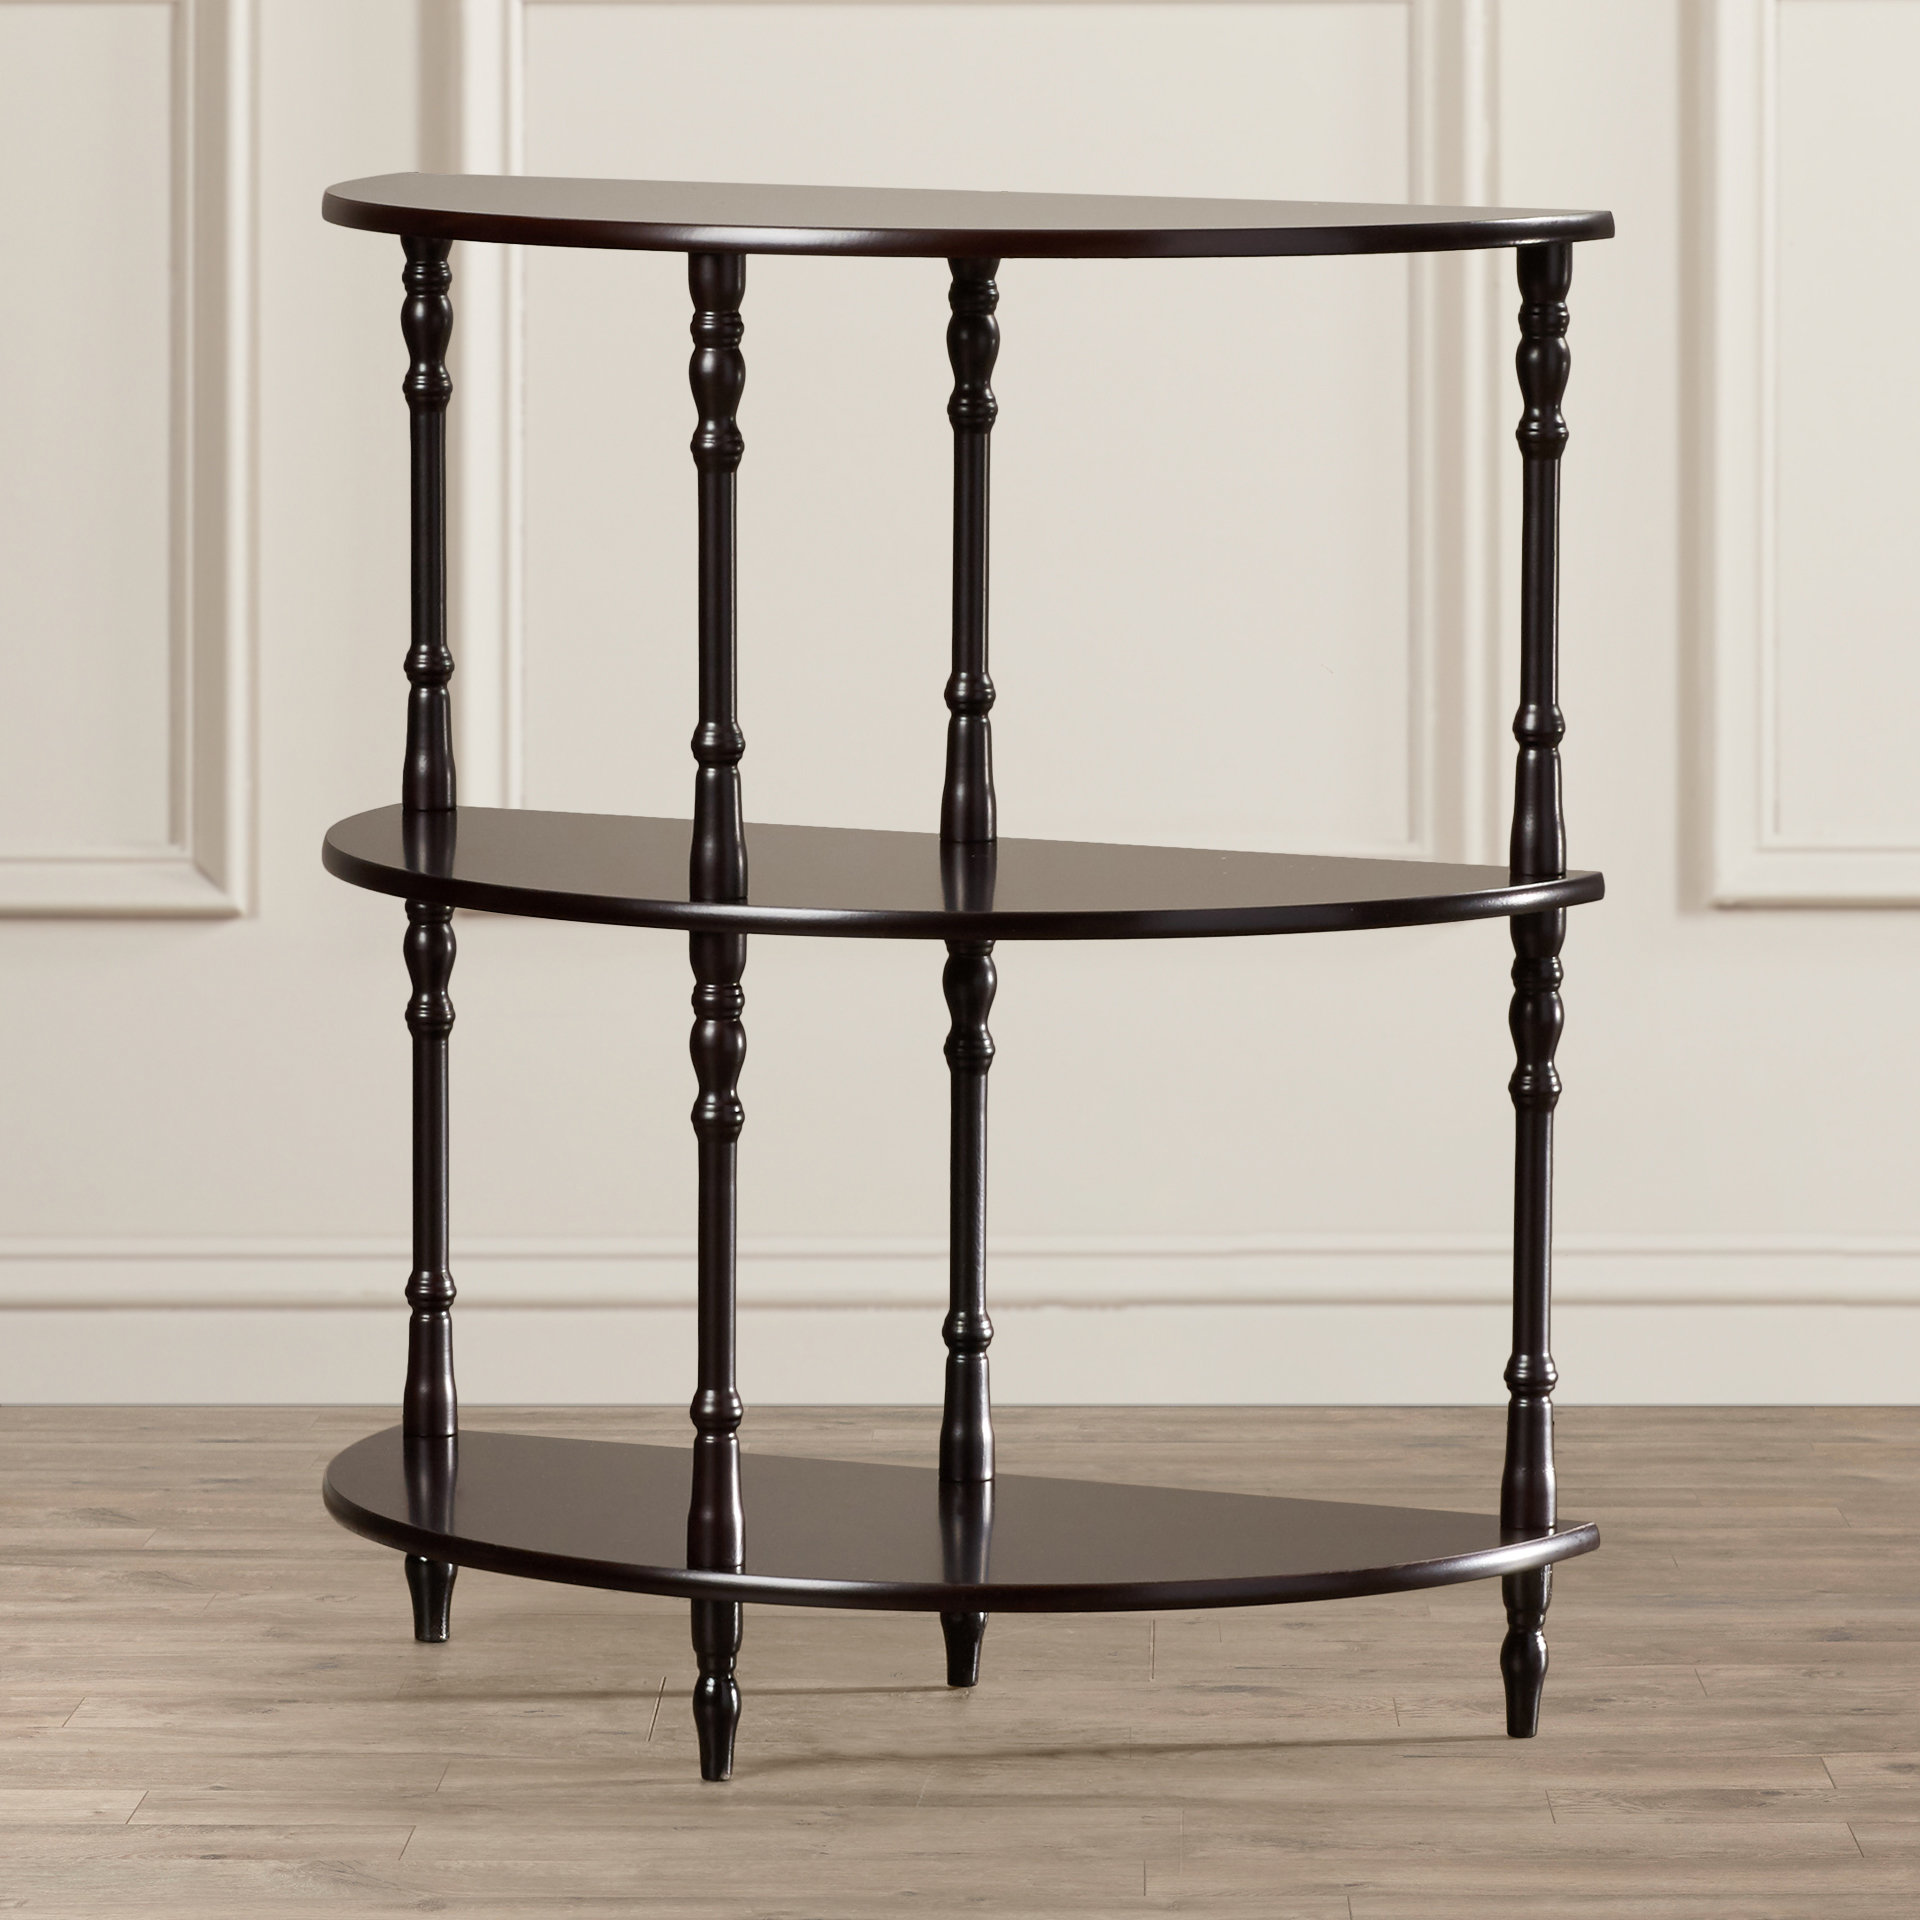 half moon accent table ladoga tier end winsome daniel with drawer black finish quickview monarch hall console west elm abacus floor lamp skinny glass two nesting tables narrow